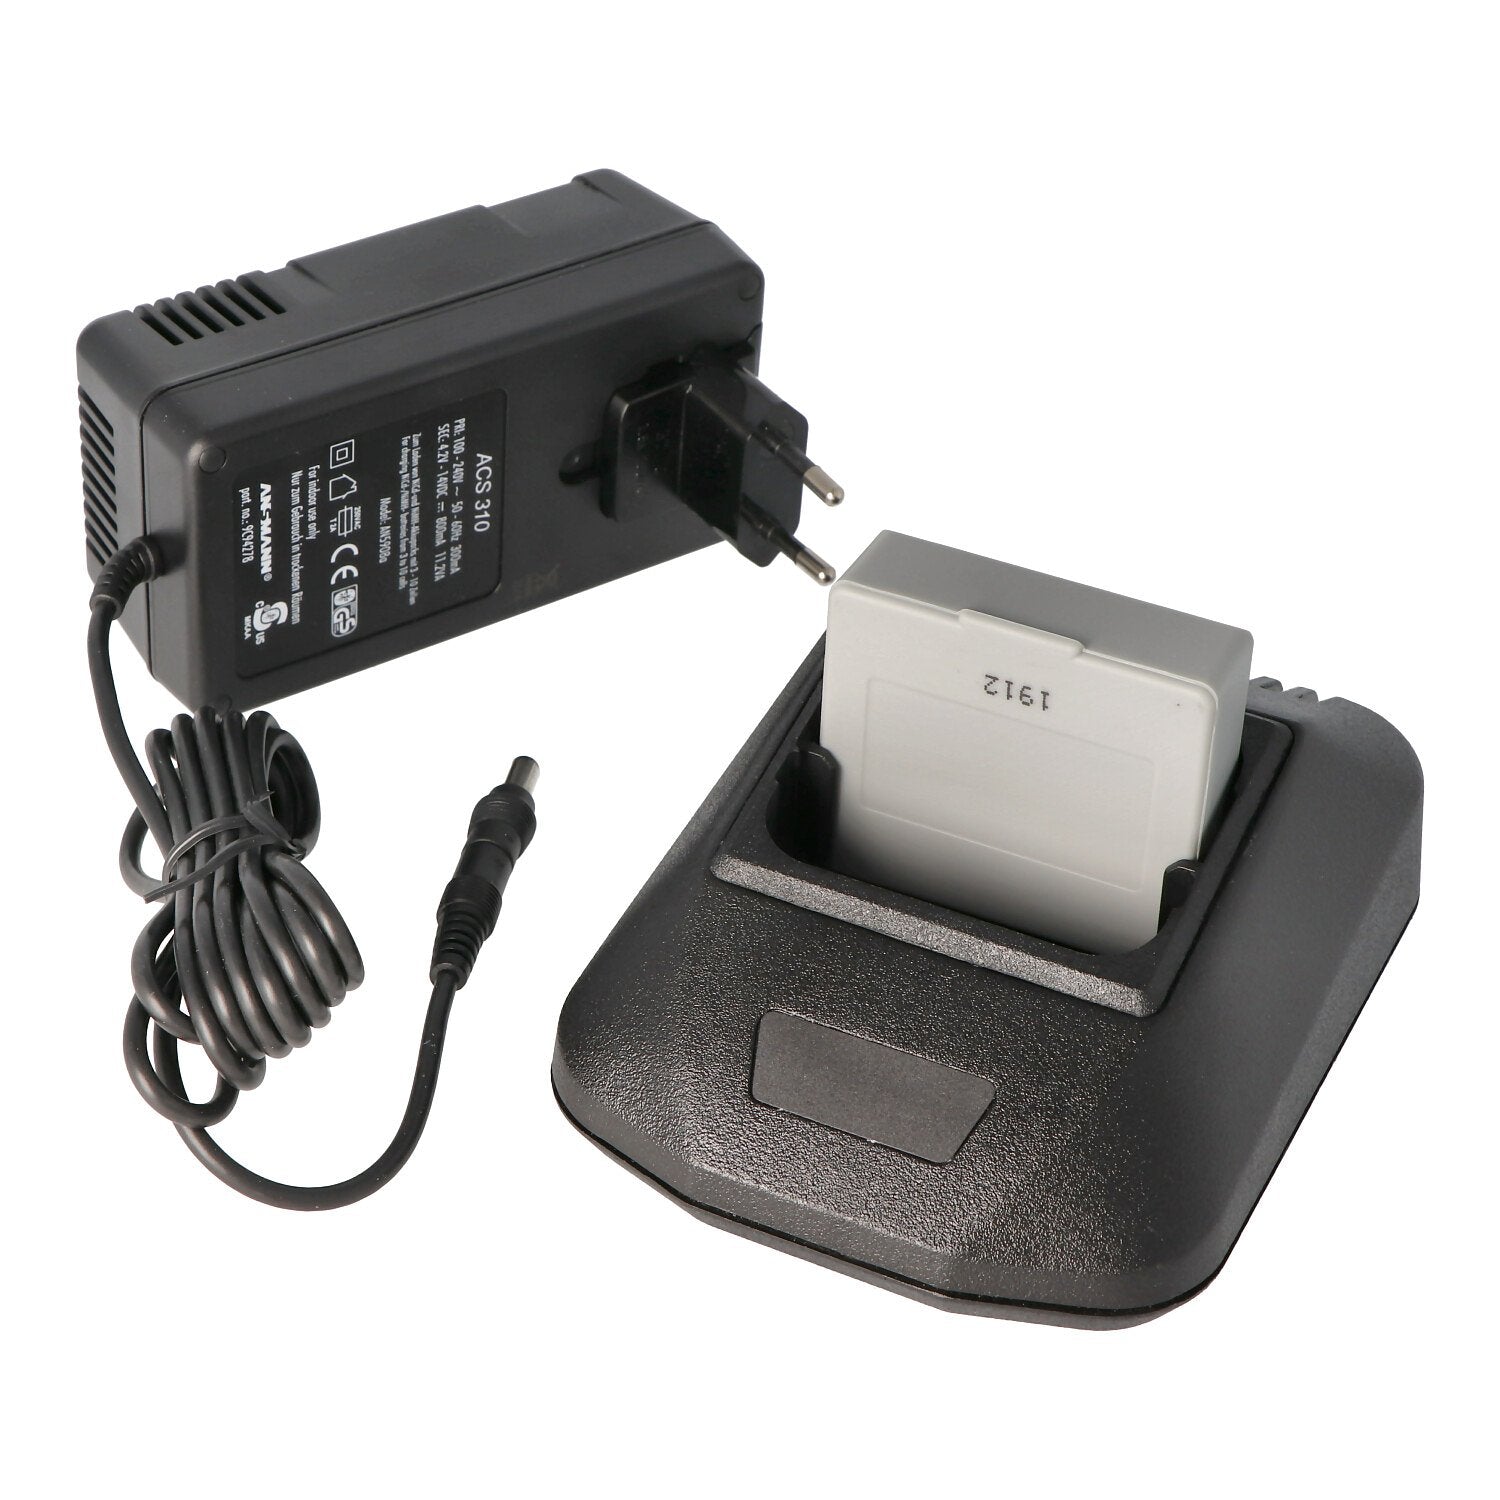 Battery and charger suitable for Hetronic NM13HA battery 68300990, 68300600, FBH300 3.6 volt 700-220